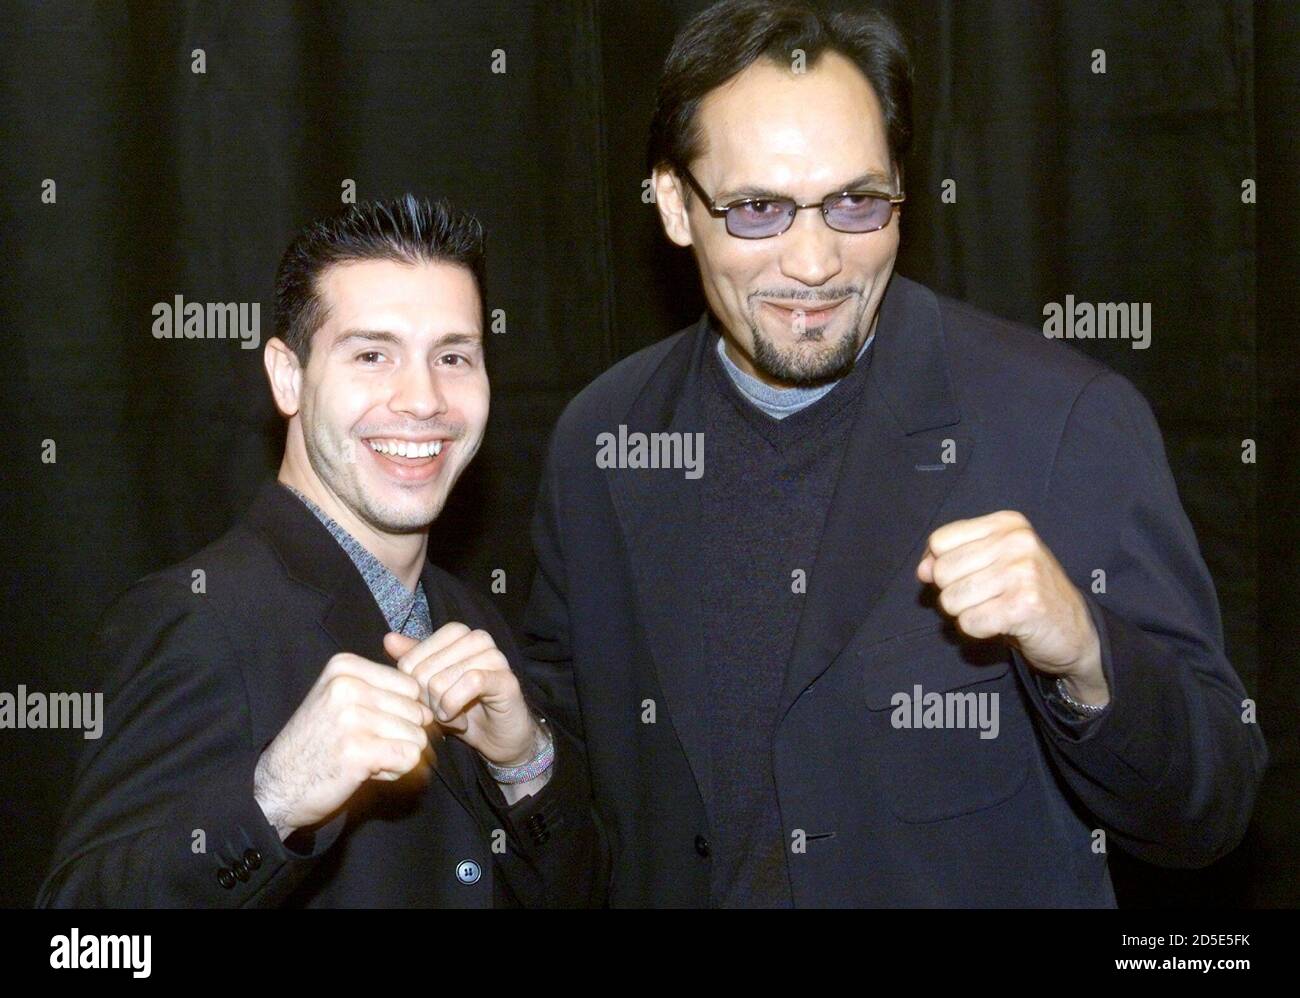 Actors Jon Seda and Jimmy Smits pose in an arrival line for a New Line Cinema luncheon at  the ShoWest 2000 convention March 7 in Las Vegas. The actors star in the upcoming boxing movie 'Price of Glory'. ShoWest is an annual convention and trade show for movie theater owners. Stock Photo